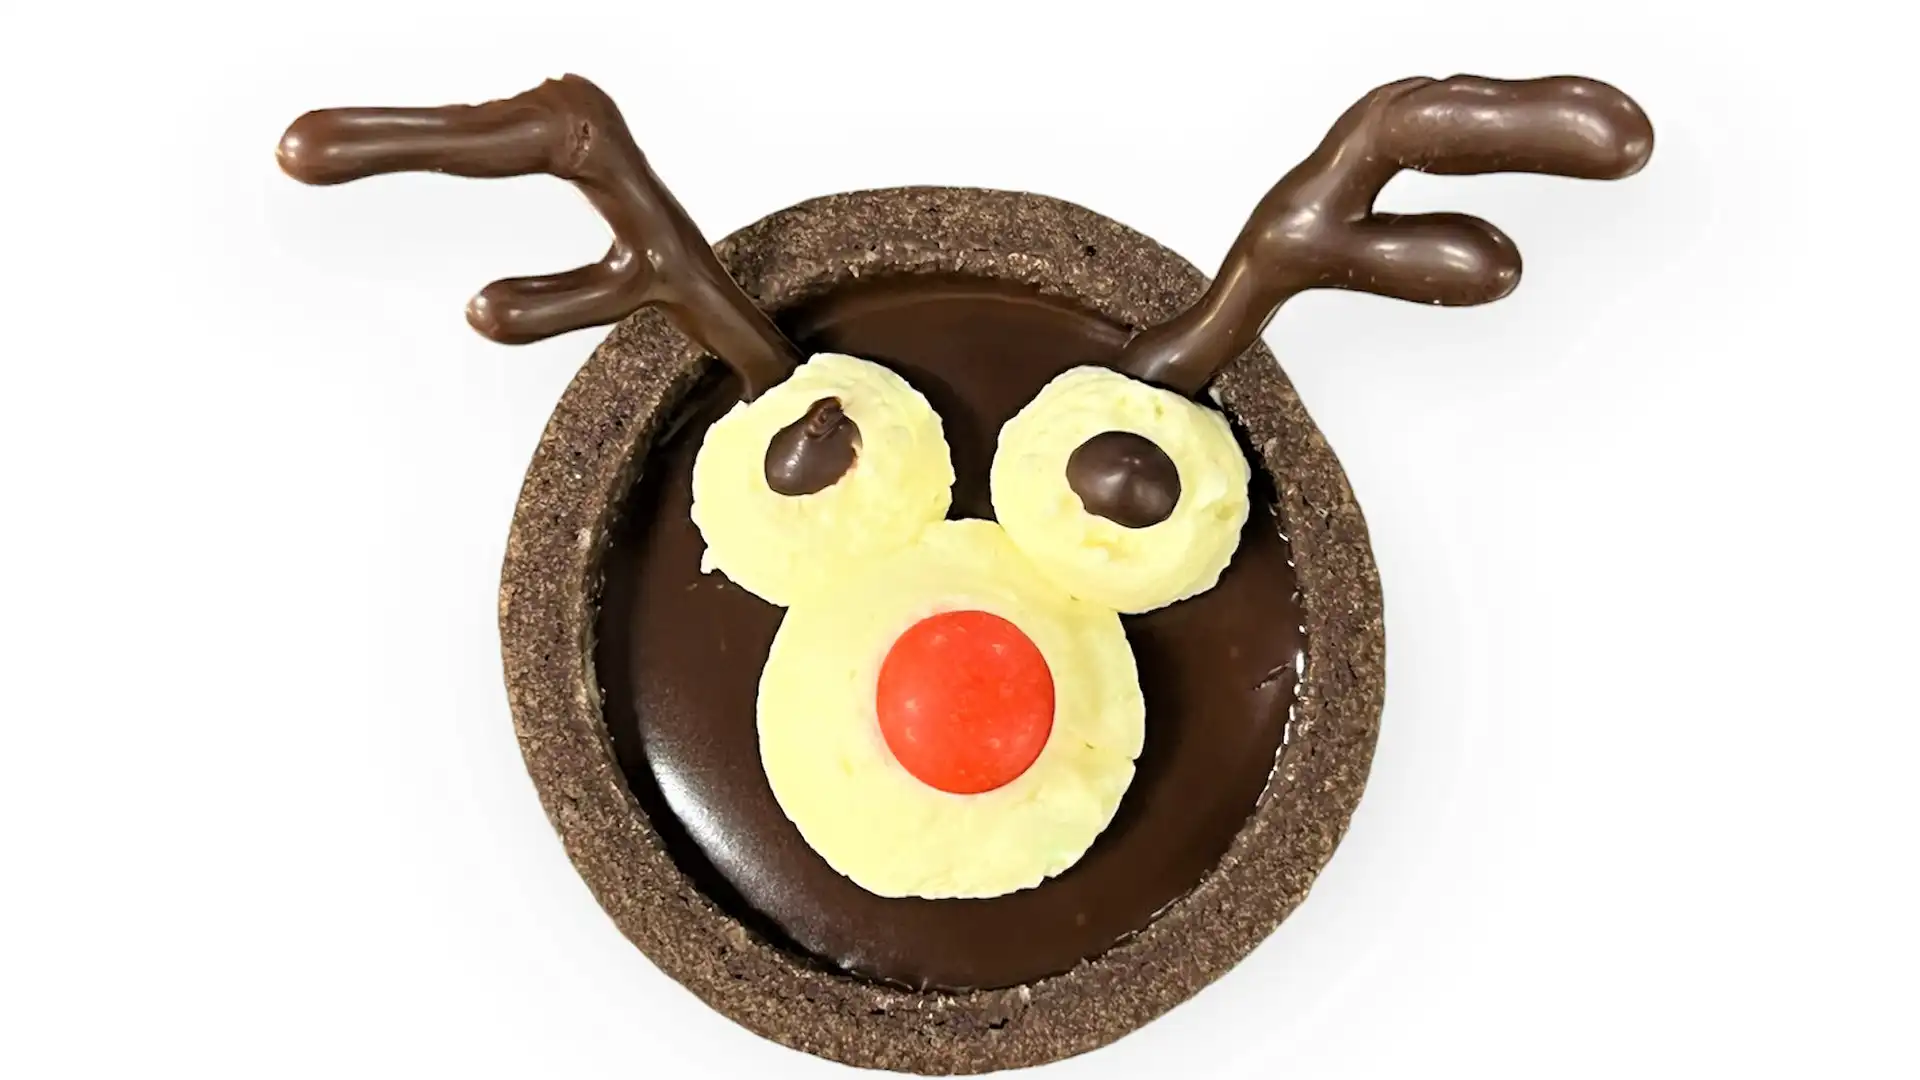 View of Holland America Line tea-time holiday dessert that looks like a reindeer with a red chocolate candy nose.